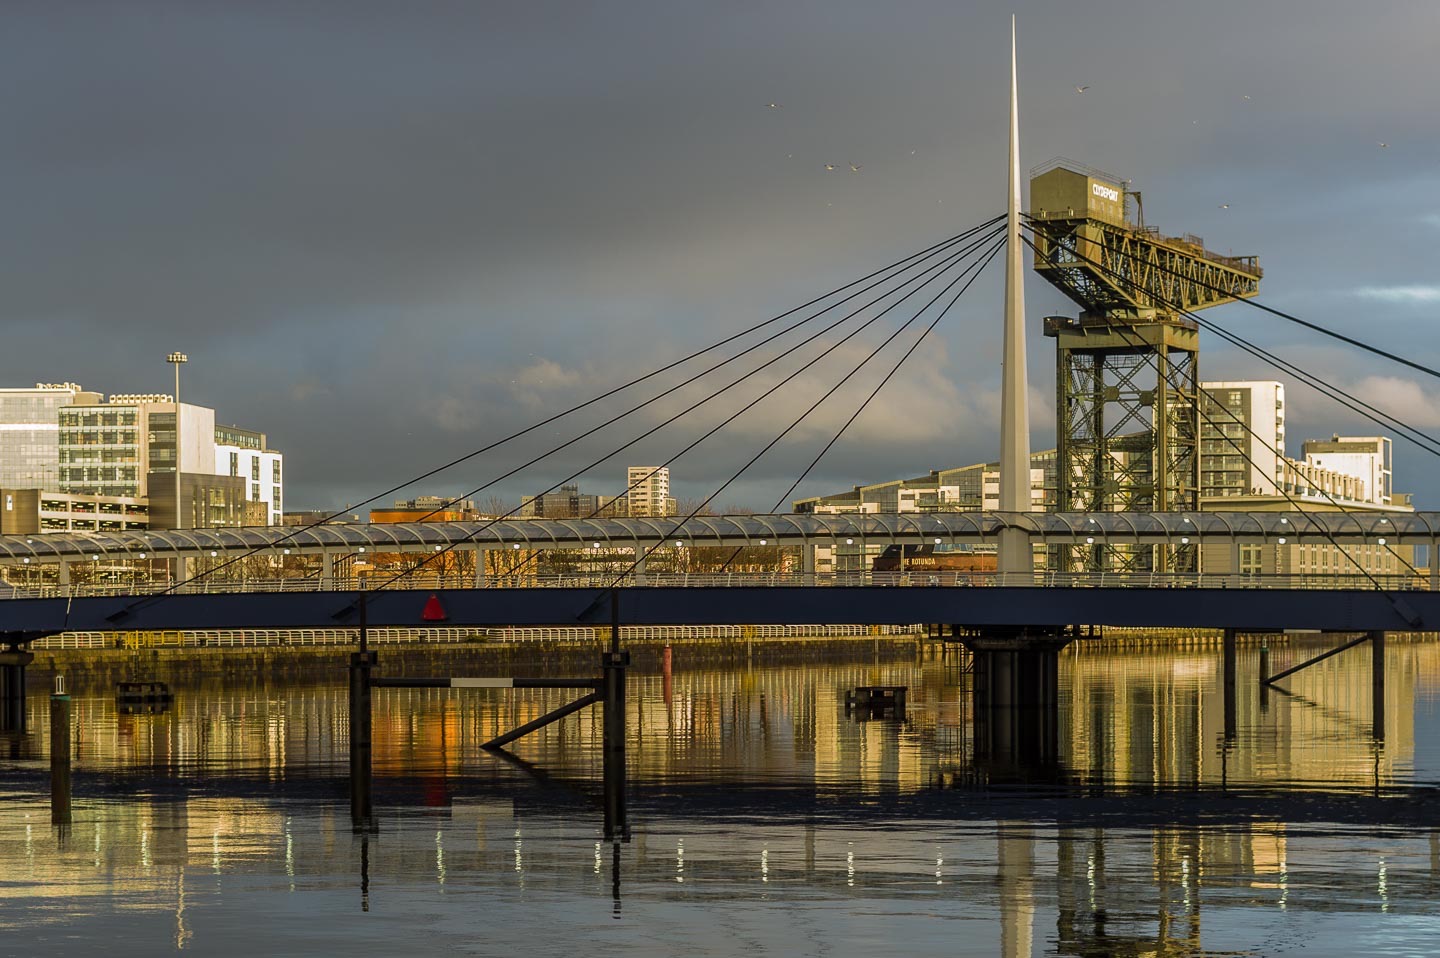 BELL'S BRIDGE
An extraordinary, and slightly menacing, lighting effect as the low afternoon sun cuts through below the clouds, illuminating the bridge, the Finneston Crane and buildings on the north bank of the Clyde